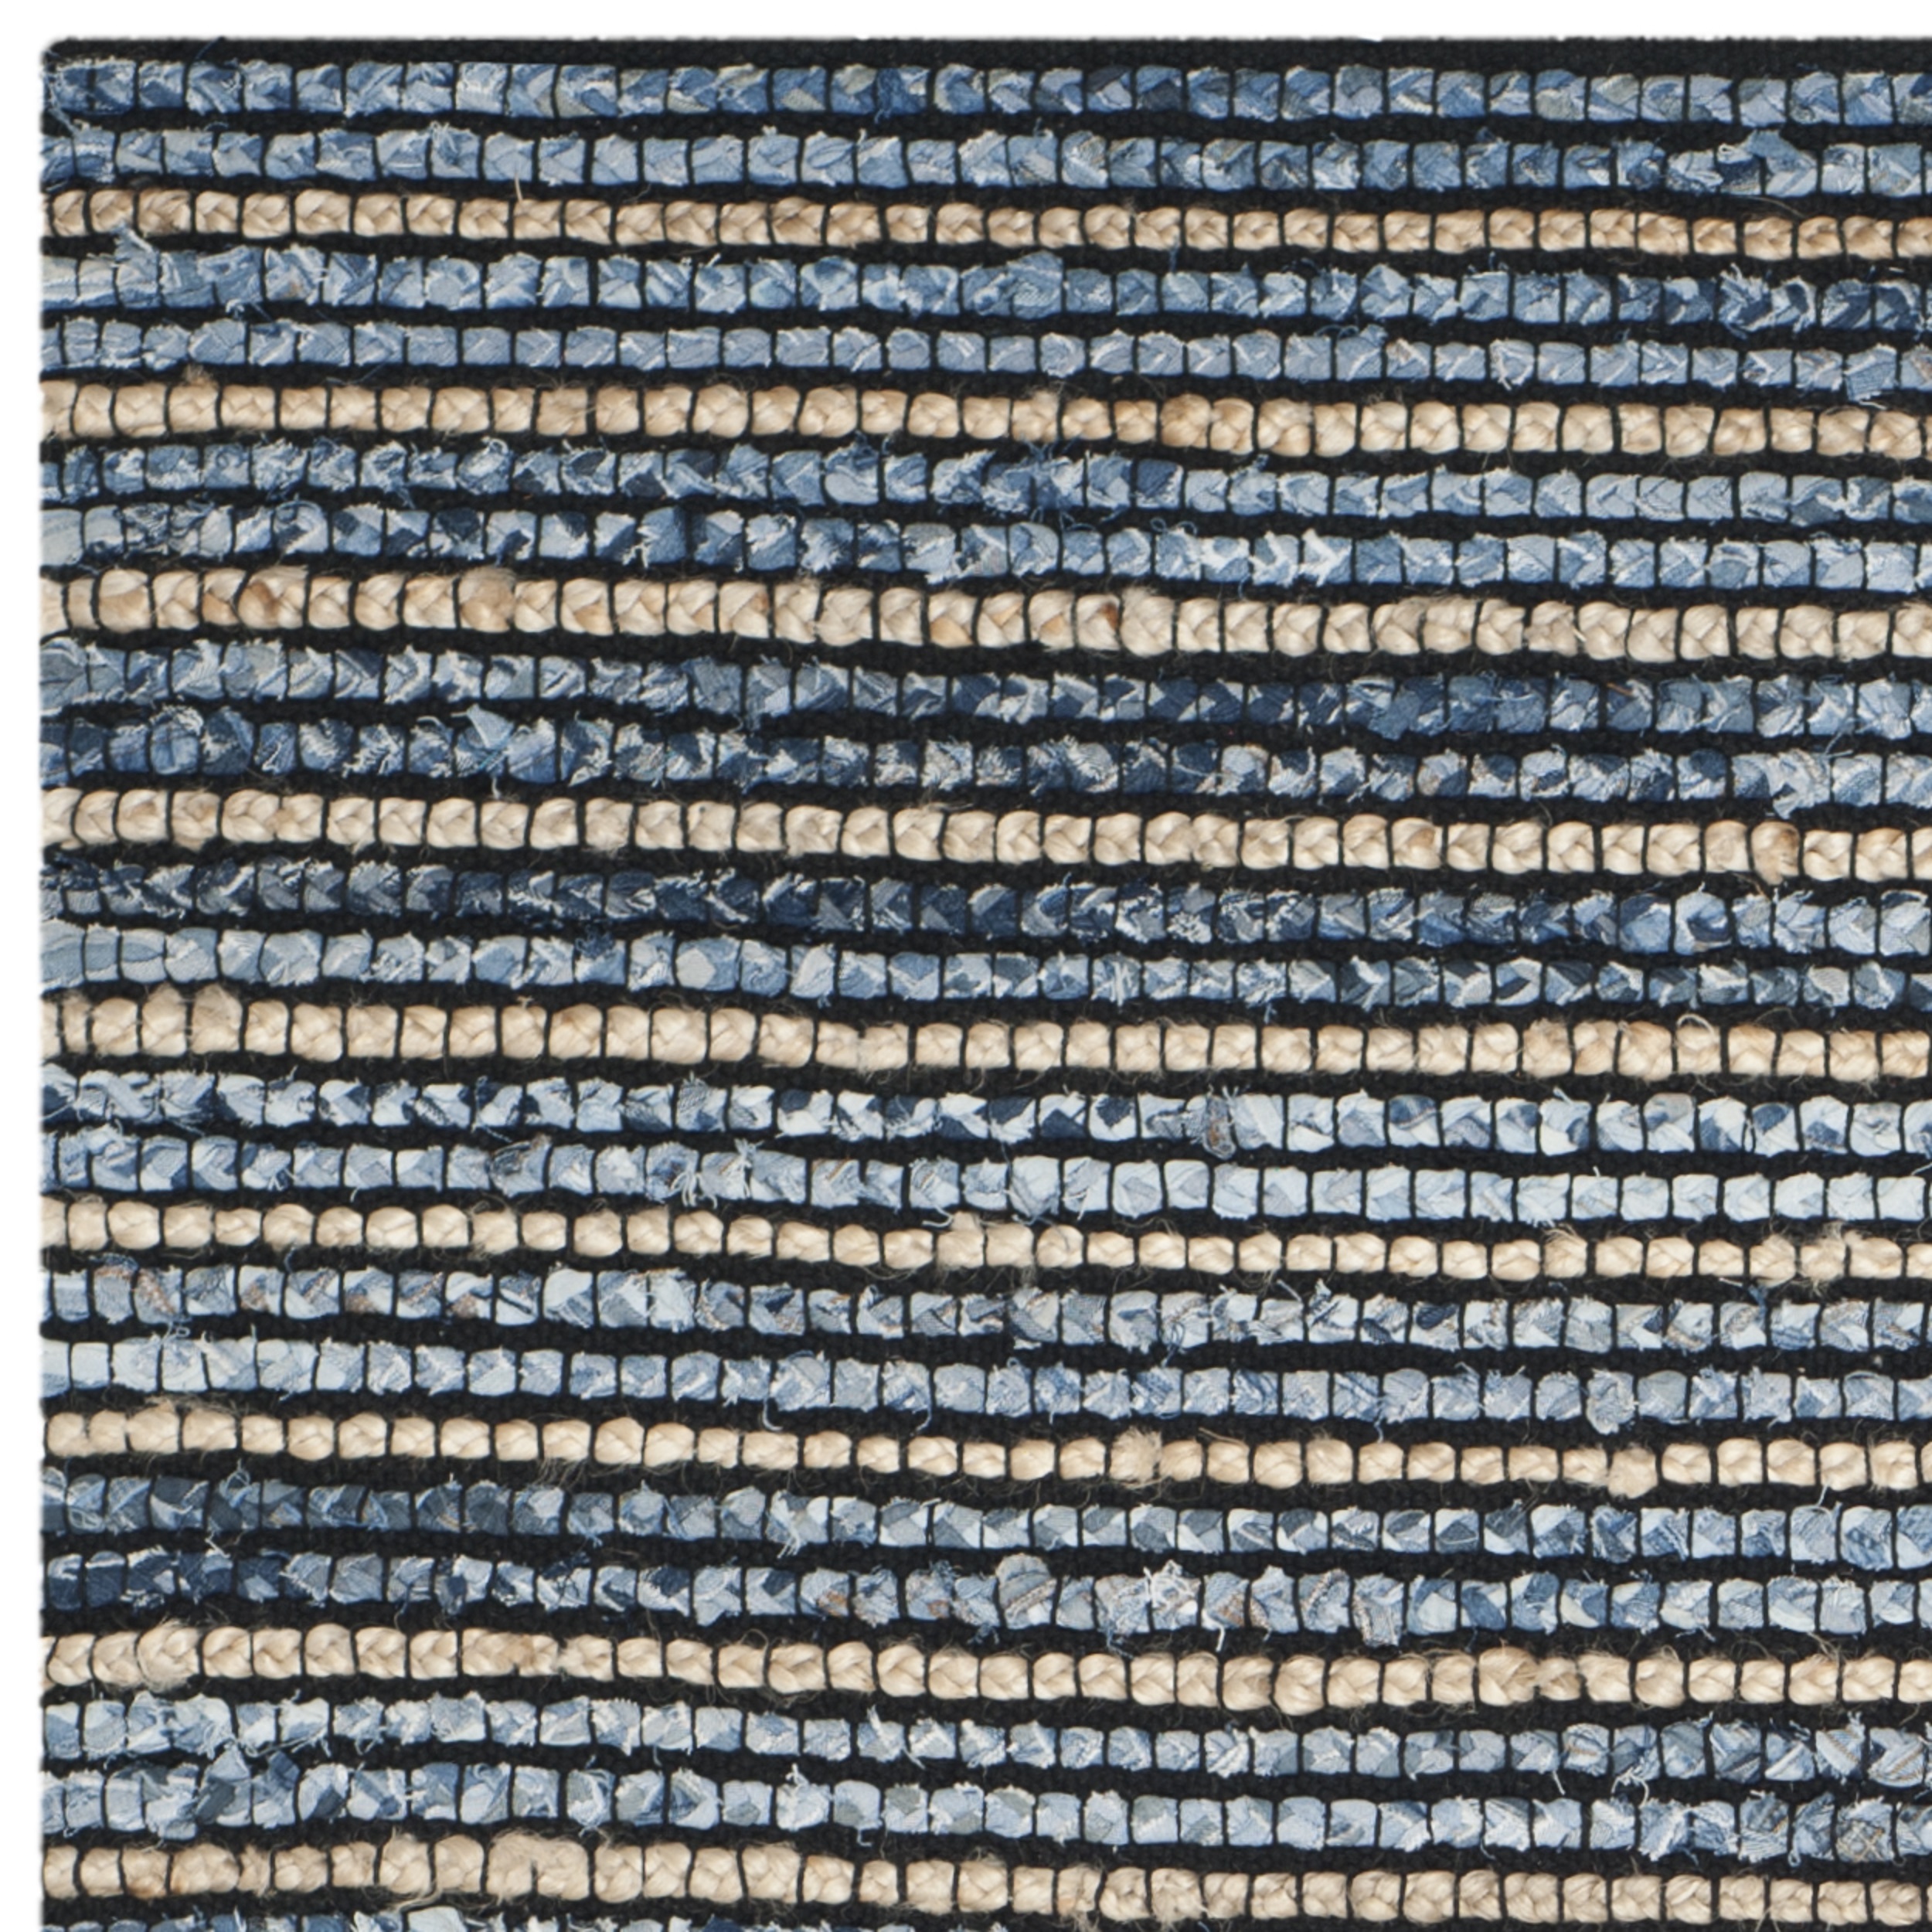 SAFAVIEH Cape Cod Signe Braided Striped Area Rug, 2'3" x 6', Blue/Natural - image 4 of 6